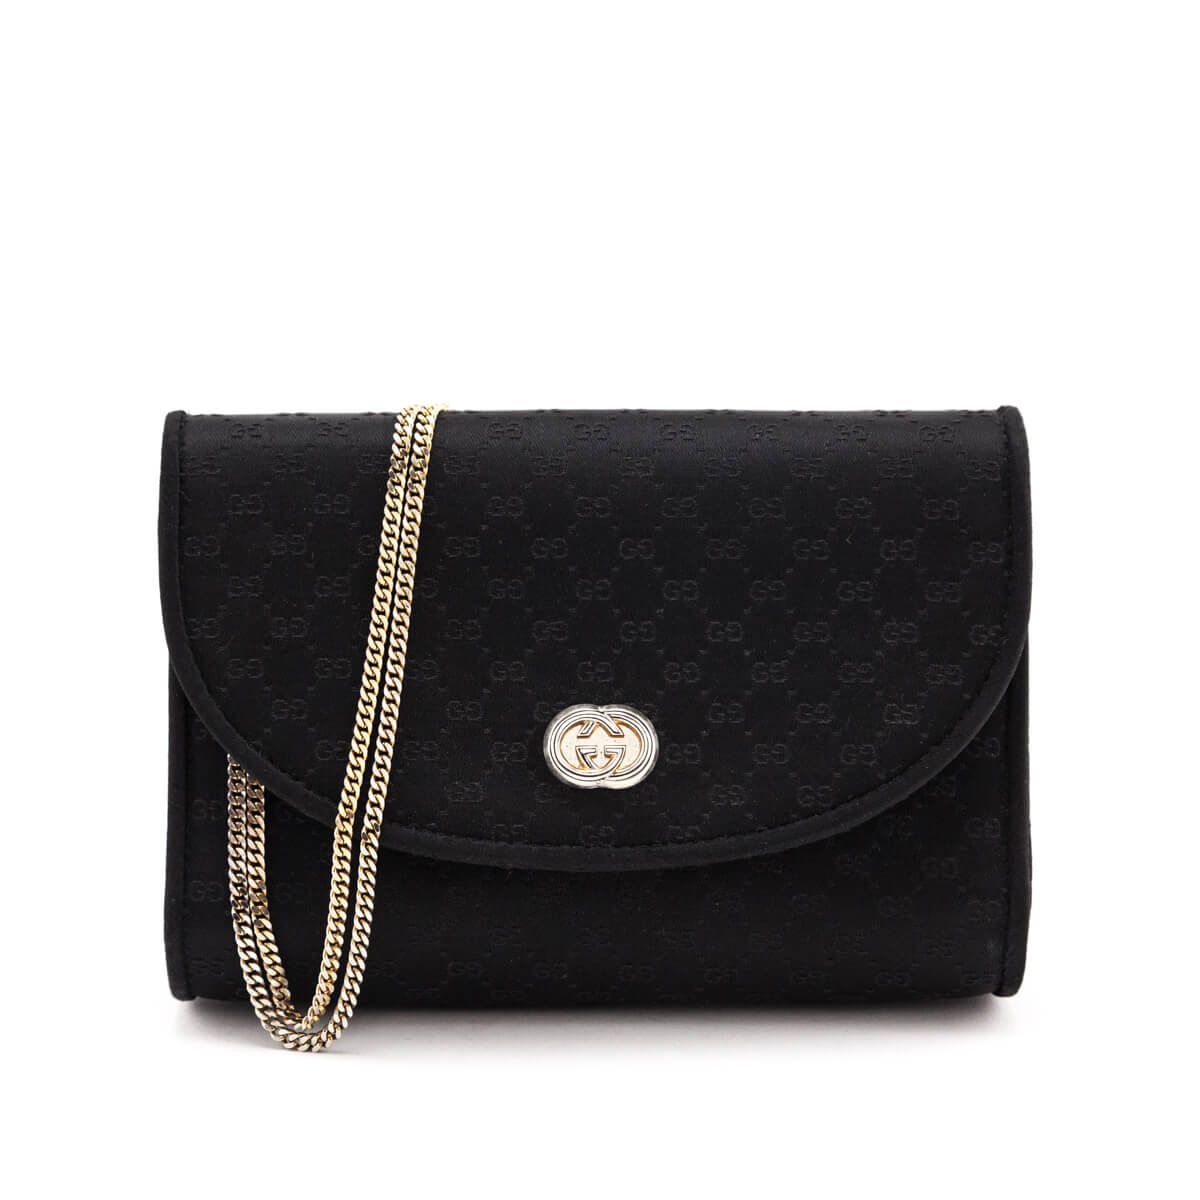 Gucci Black Fabric Micro GG Vintage Evening Bag - Preloved Gucci Bags